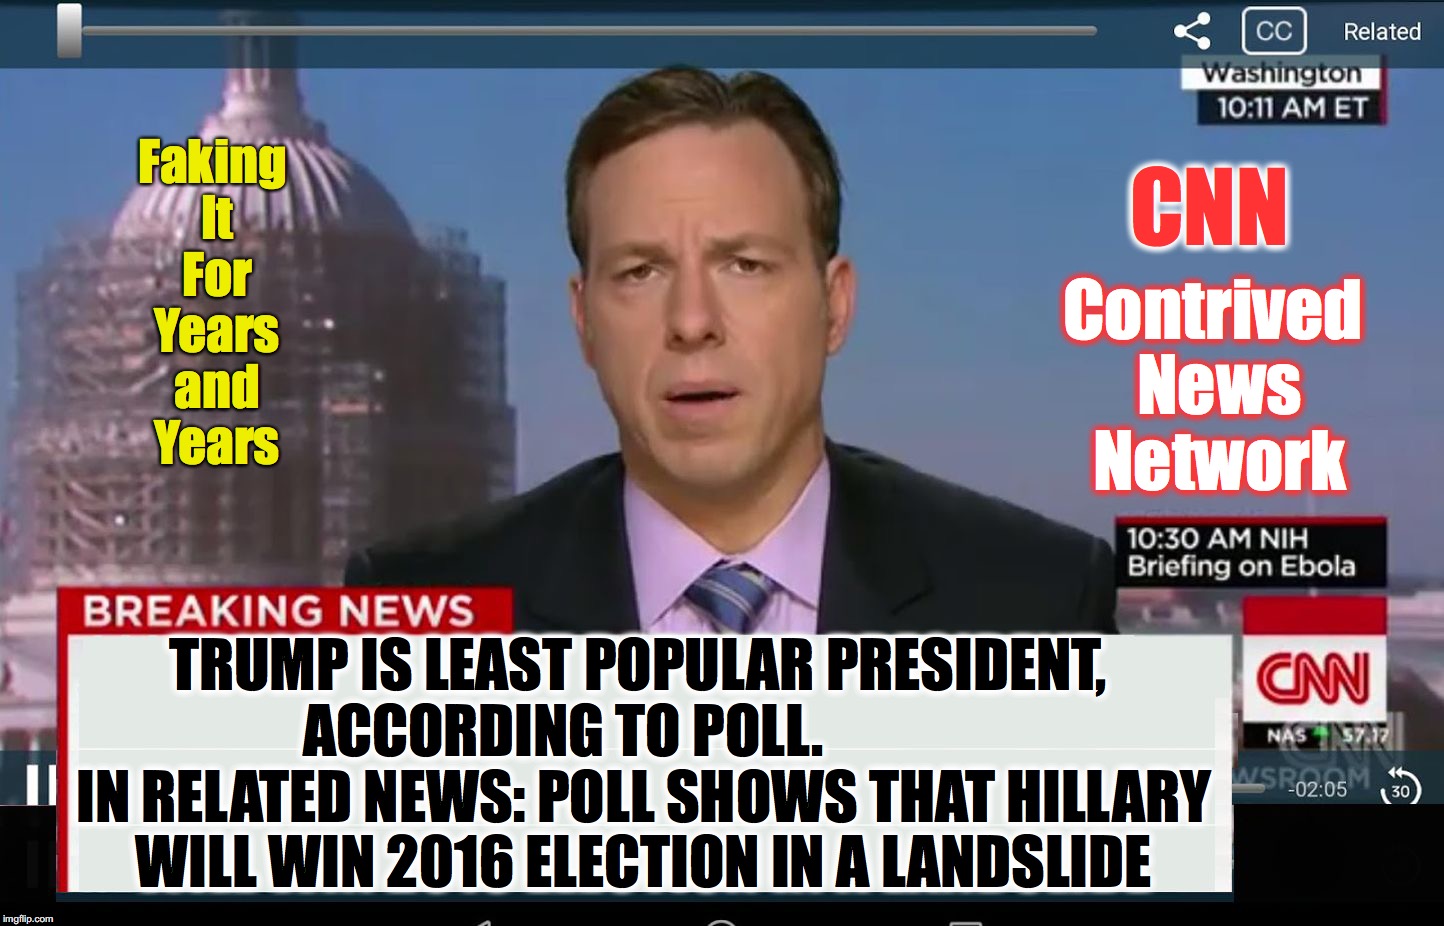 CNN Crazy News Network | CNN; Faking It For Years and Years; Contrived News Network; TRUMP IS LEAST POPULAR PRESIDENT, ACCORDING TO POLL.               IN RELATED NEWS: POLL SHOWS THAT HILLARY WILL WIN 2016 ELECTION IN A LANDSLIDE | image tagged in cnn crazy news network | made w/ Imgflip meme maker